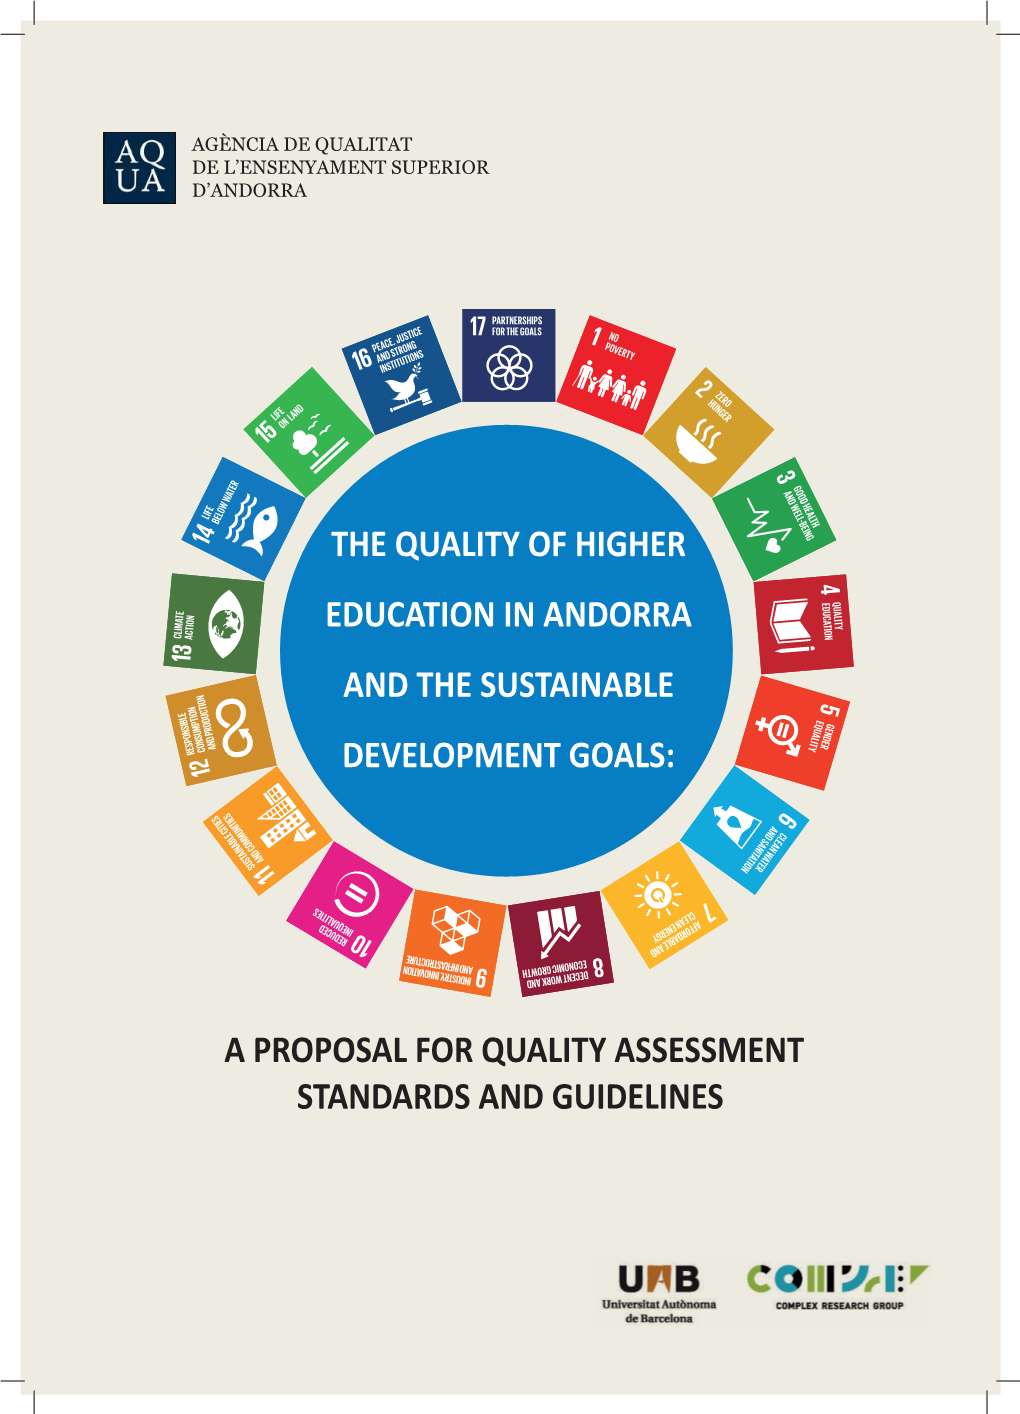 The Quality of Higher Education in Andorra and the Sustainable Development Goals